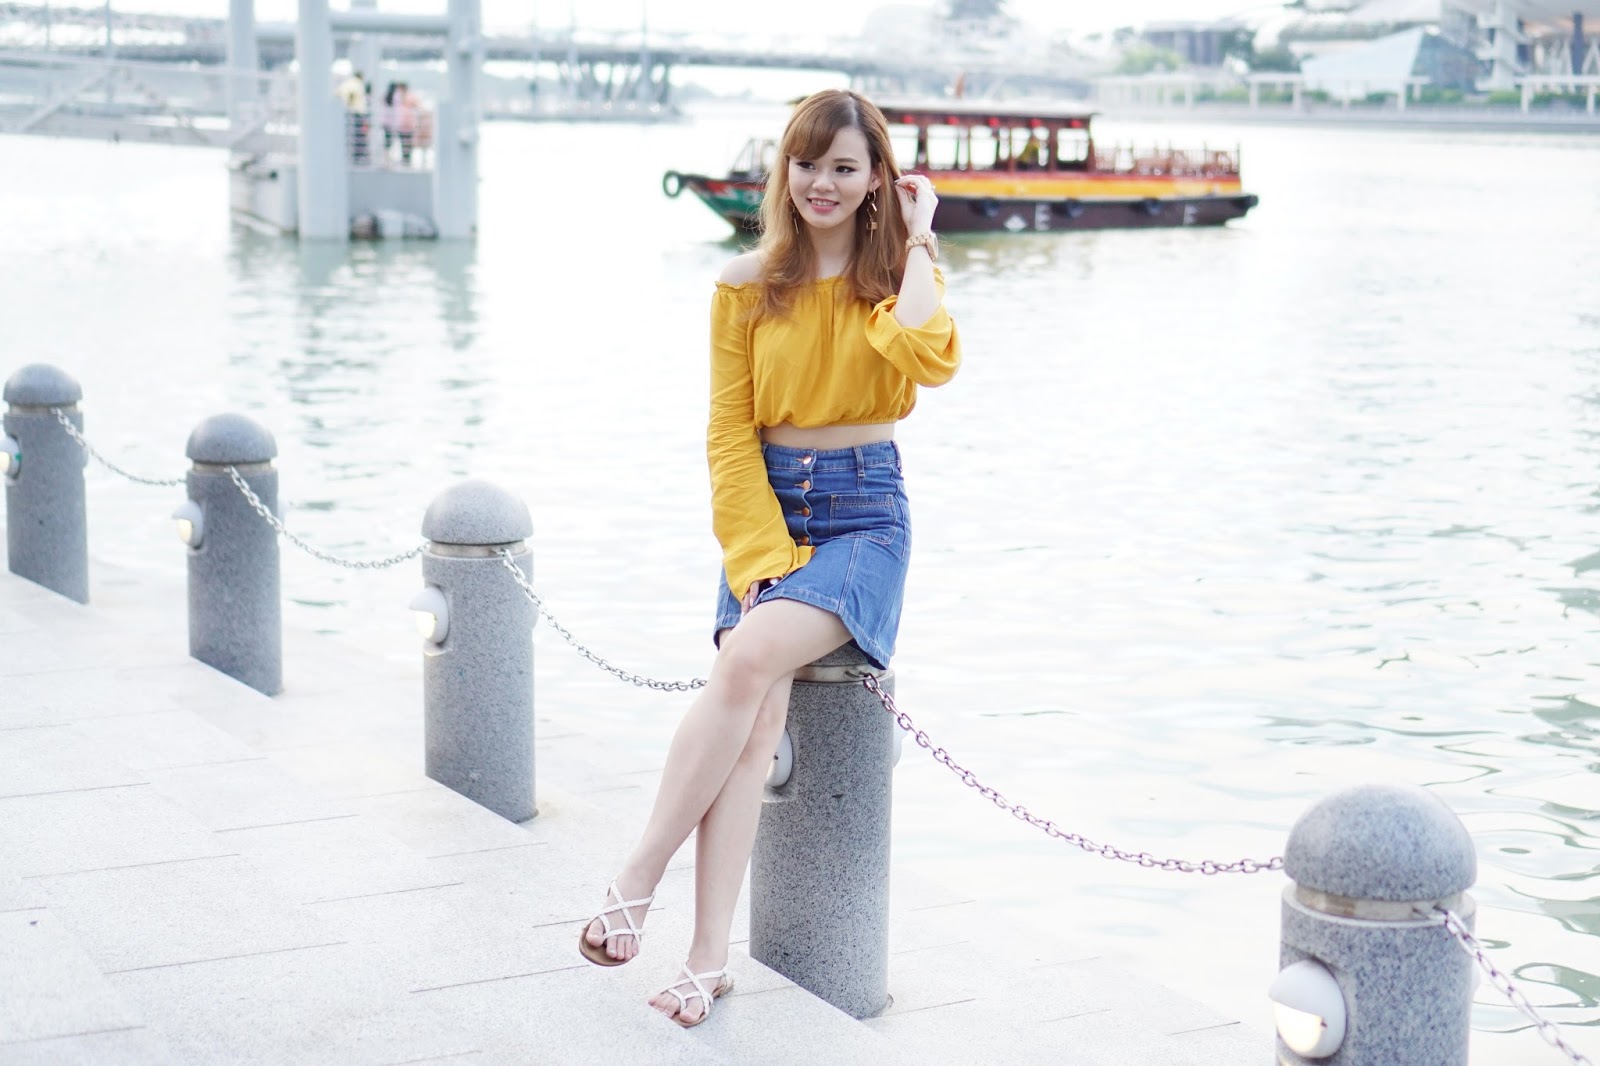 h&m, forever 21, casual outfit, fashion, ootd, jeanmilka ootd, fashion blogger, fashion blogger indonesia, singapore, marina bay sands, travel to singapore, indonesia fashion blogger